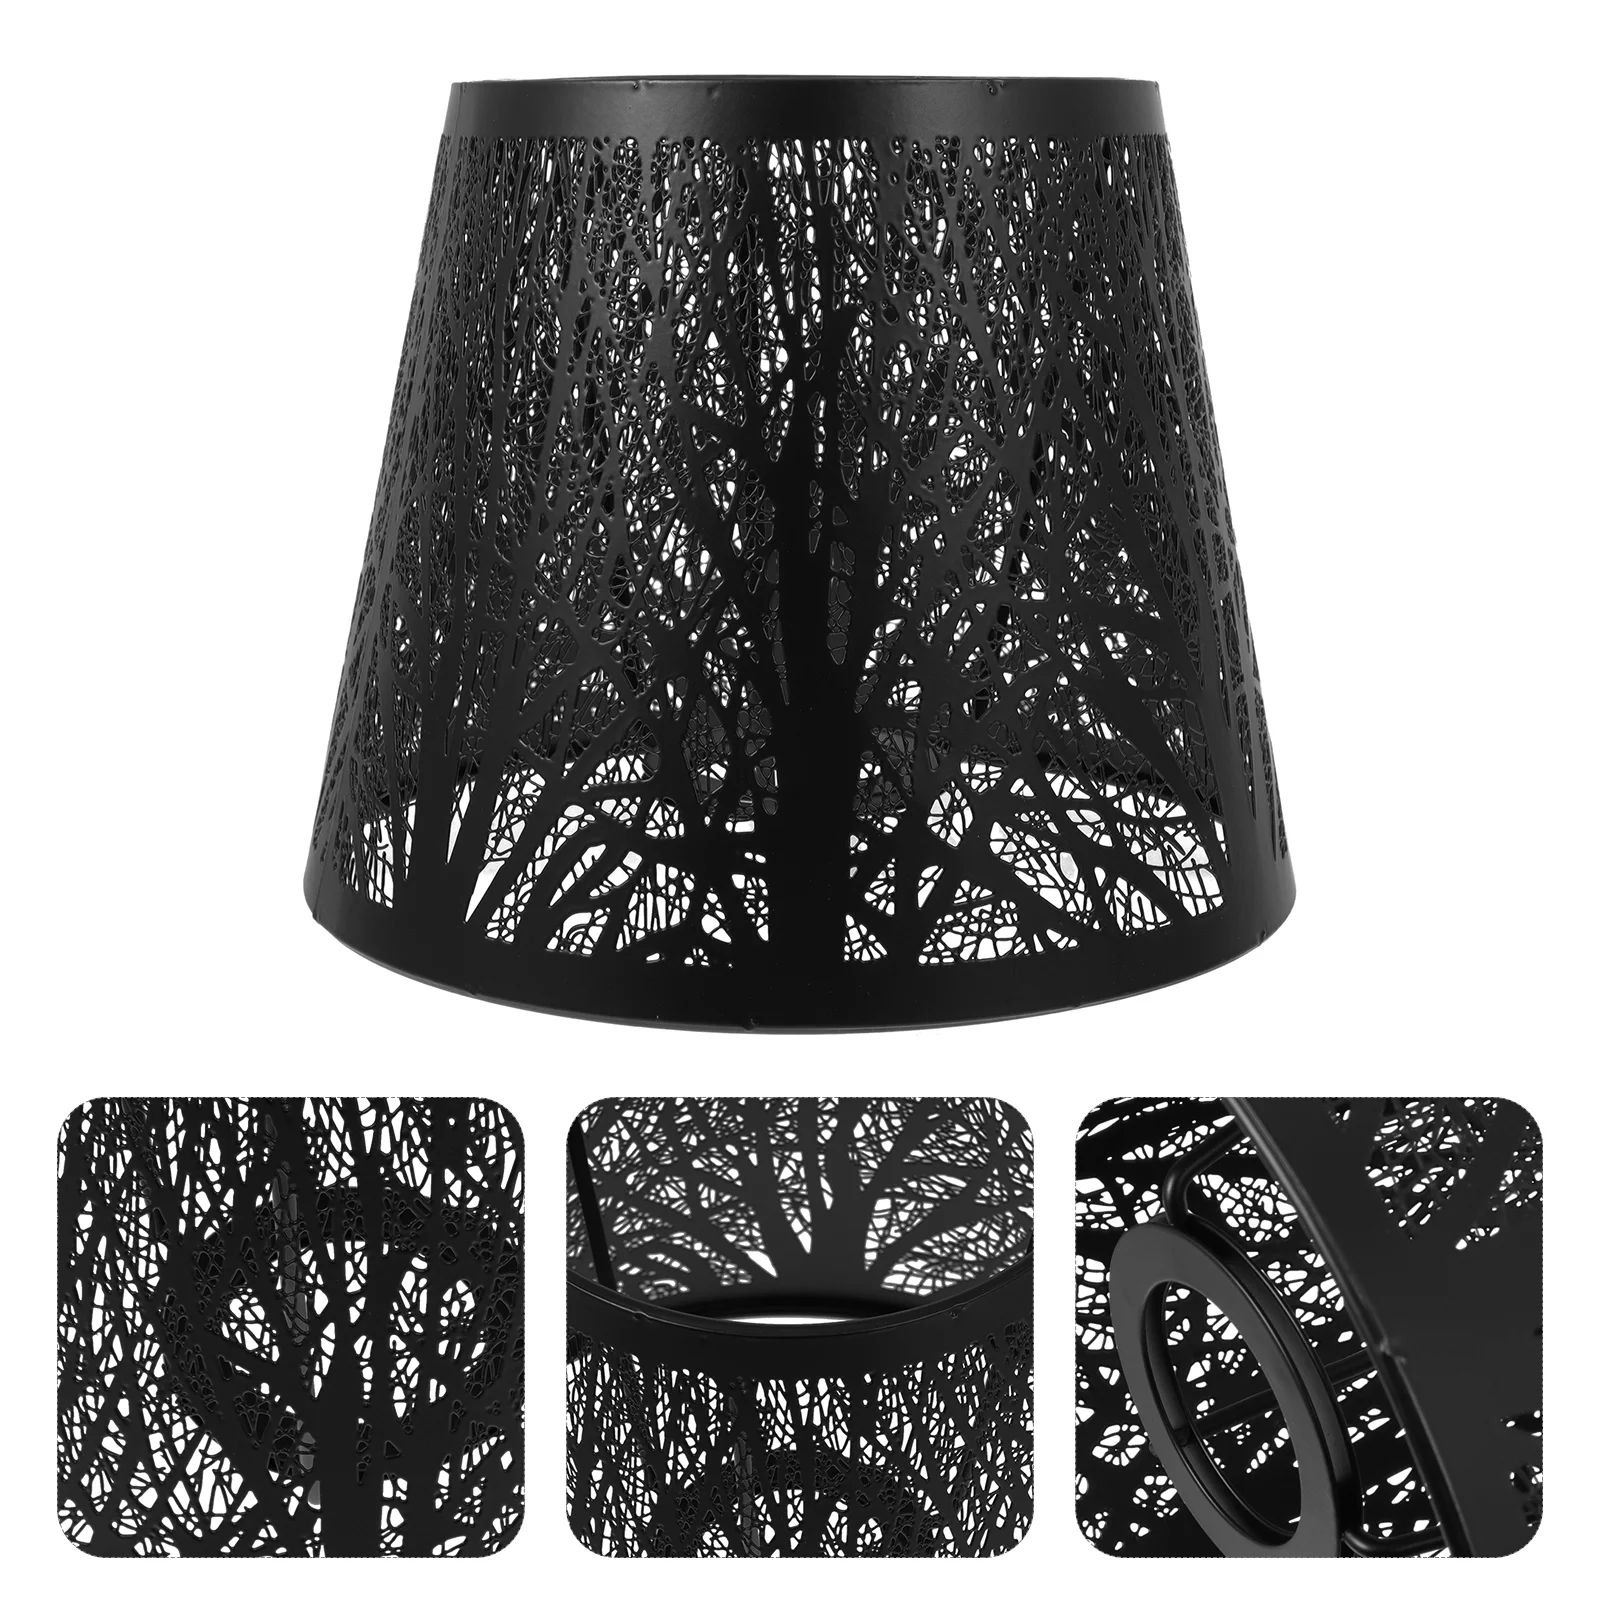  chandelier tablemetal shadow lampshades fabric floor shades decorative iron drum lamps thumb200